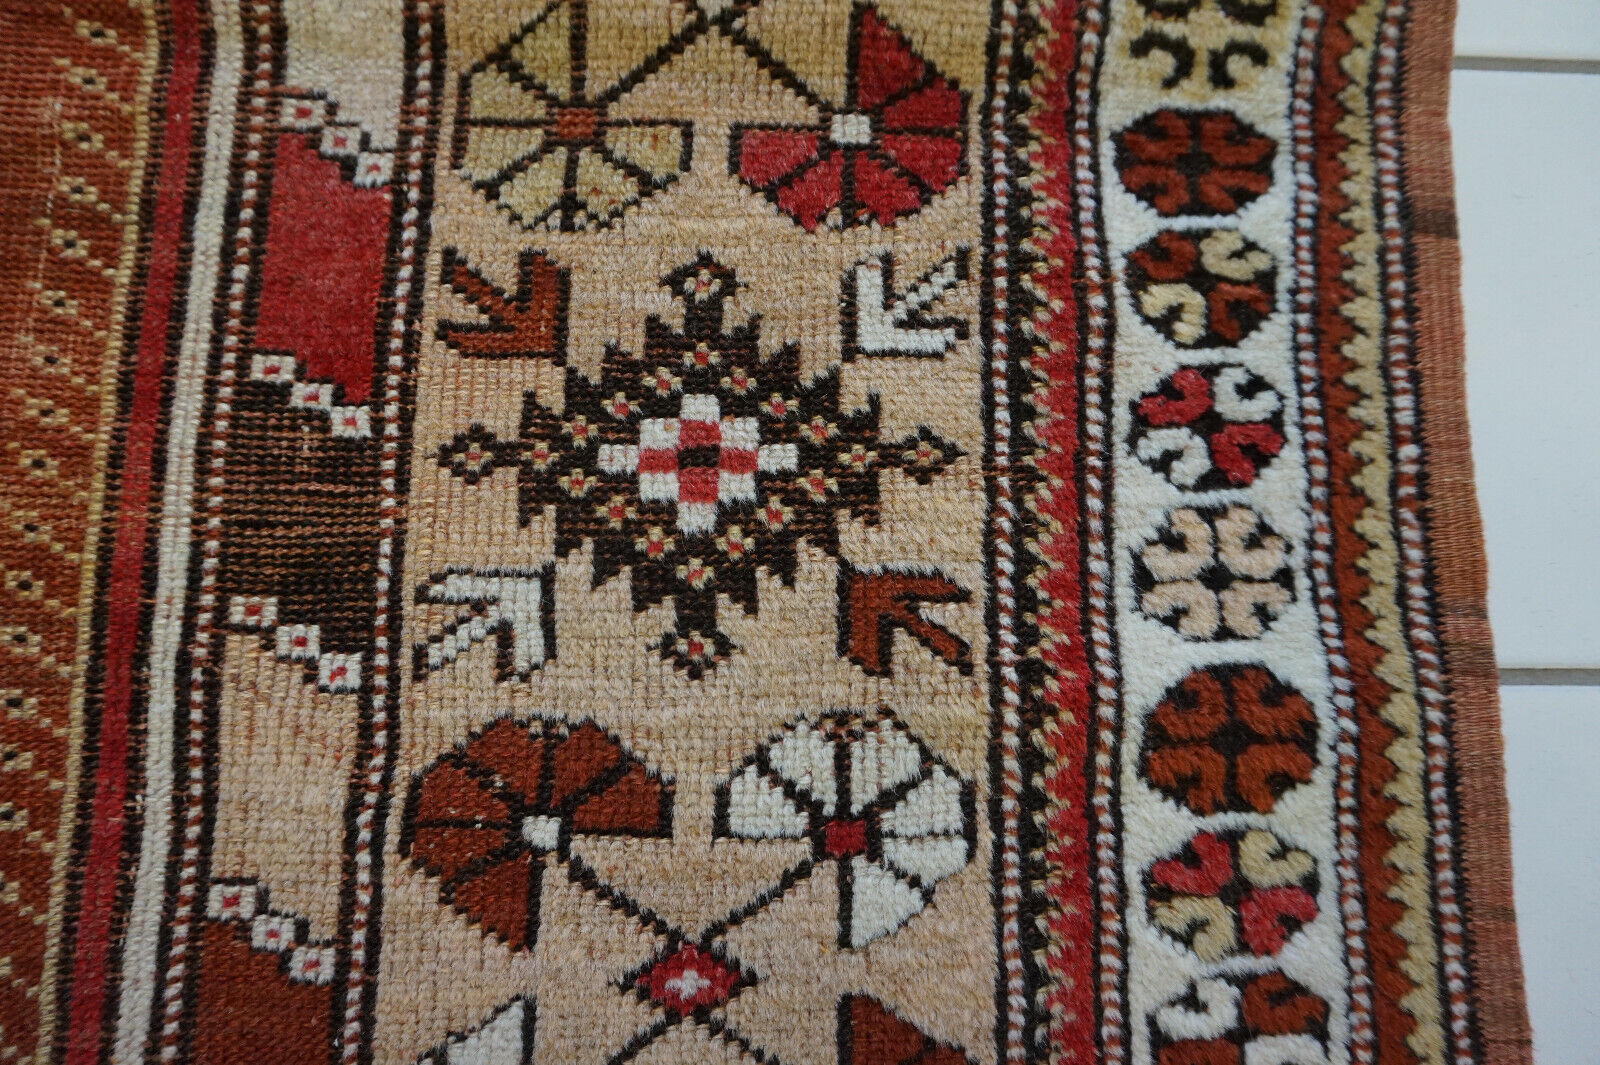 Close-up of the rich, intricate design on the Handmade Traditional Turkish Melas Rug